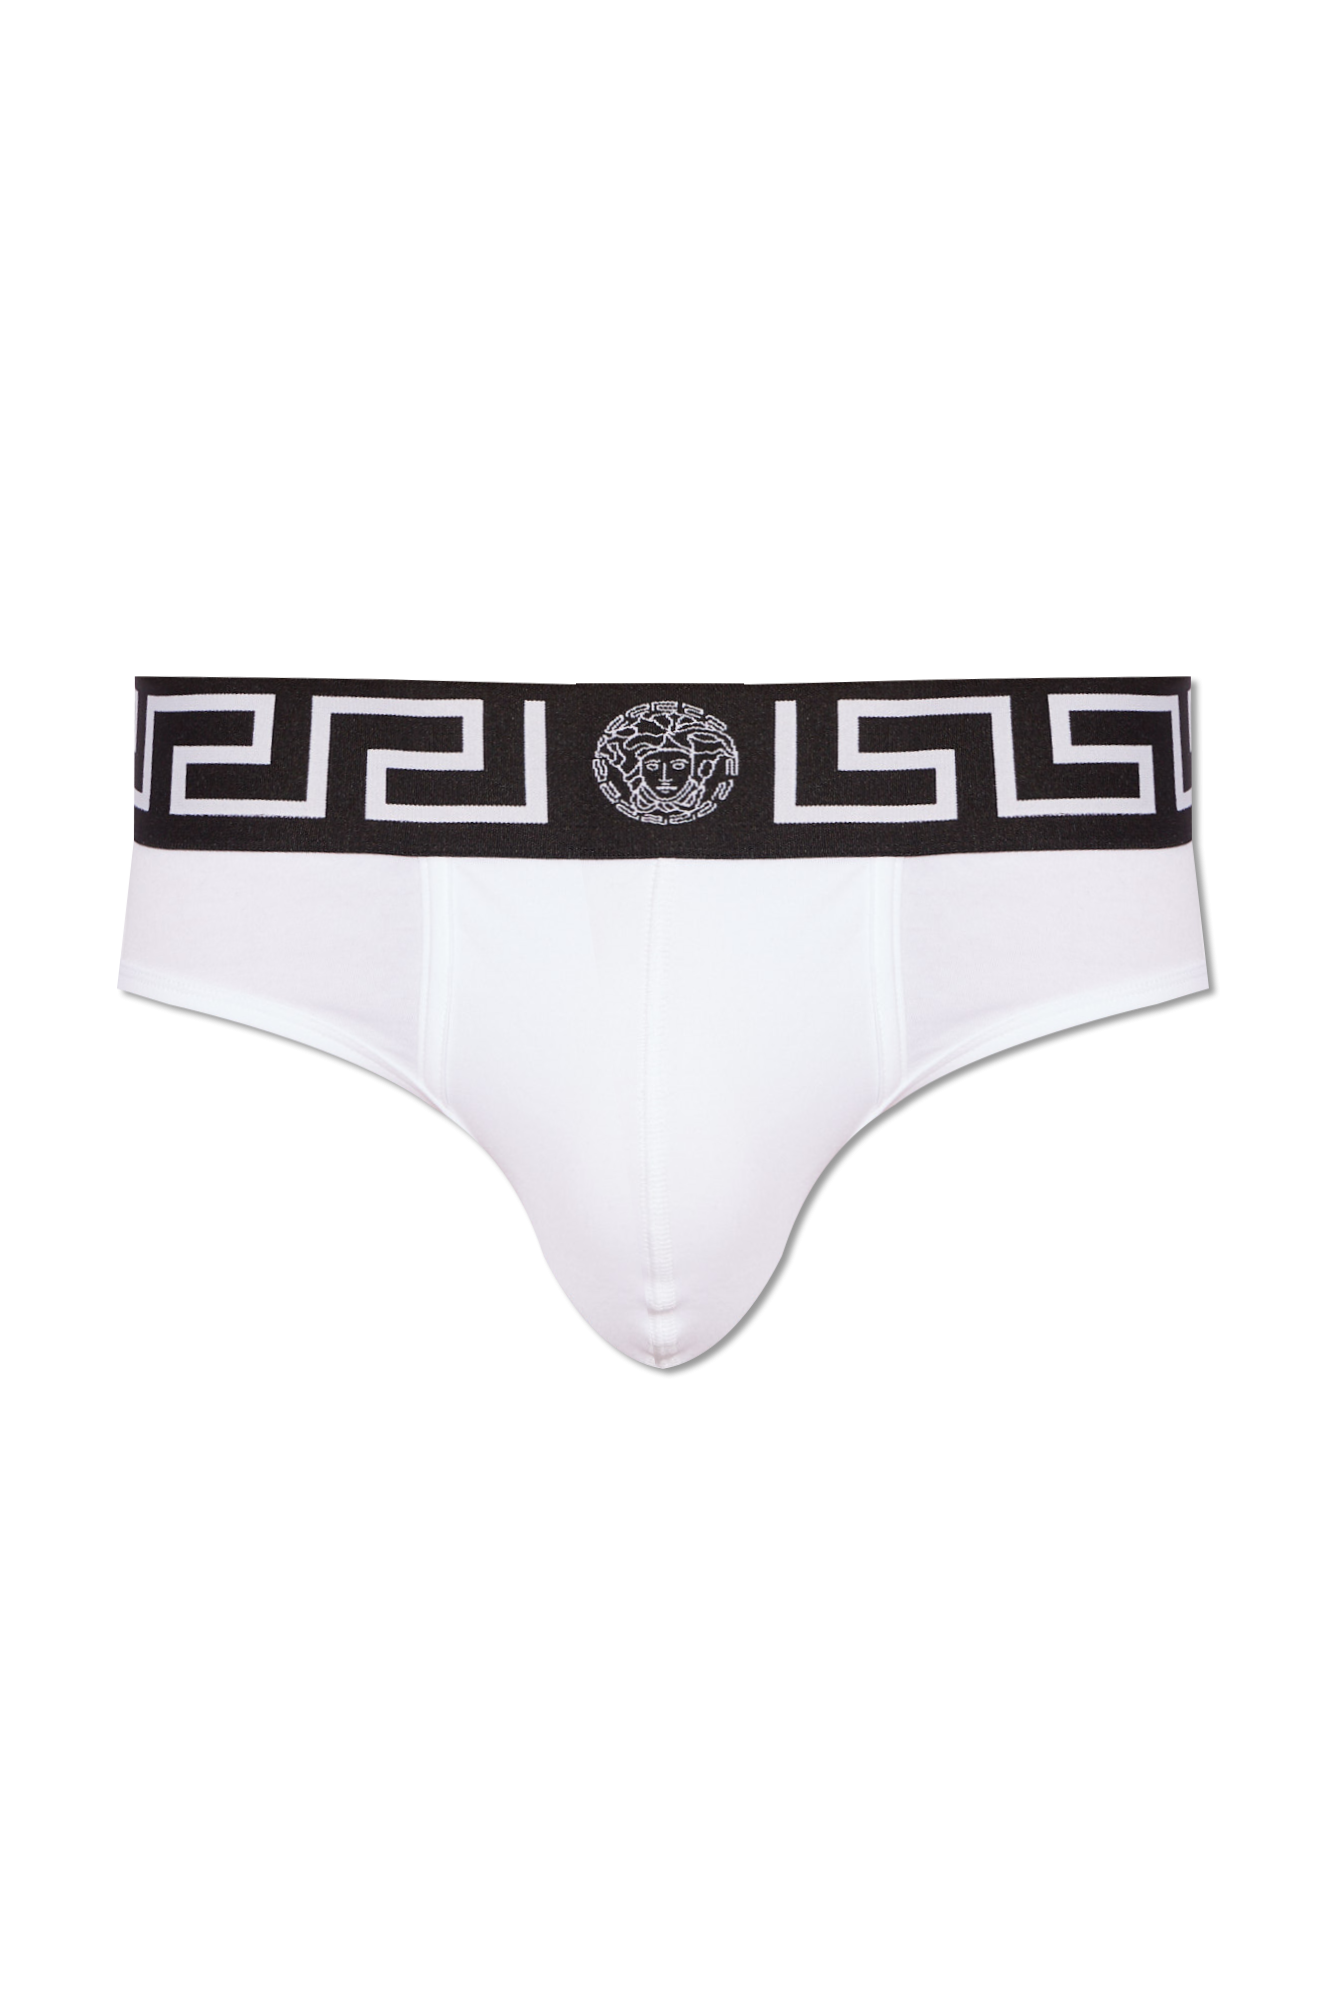 Versace Boxers with logo